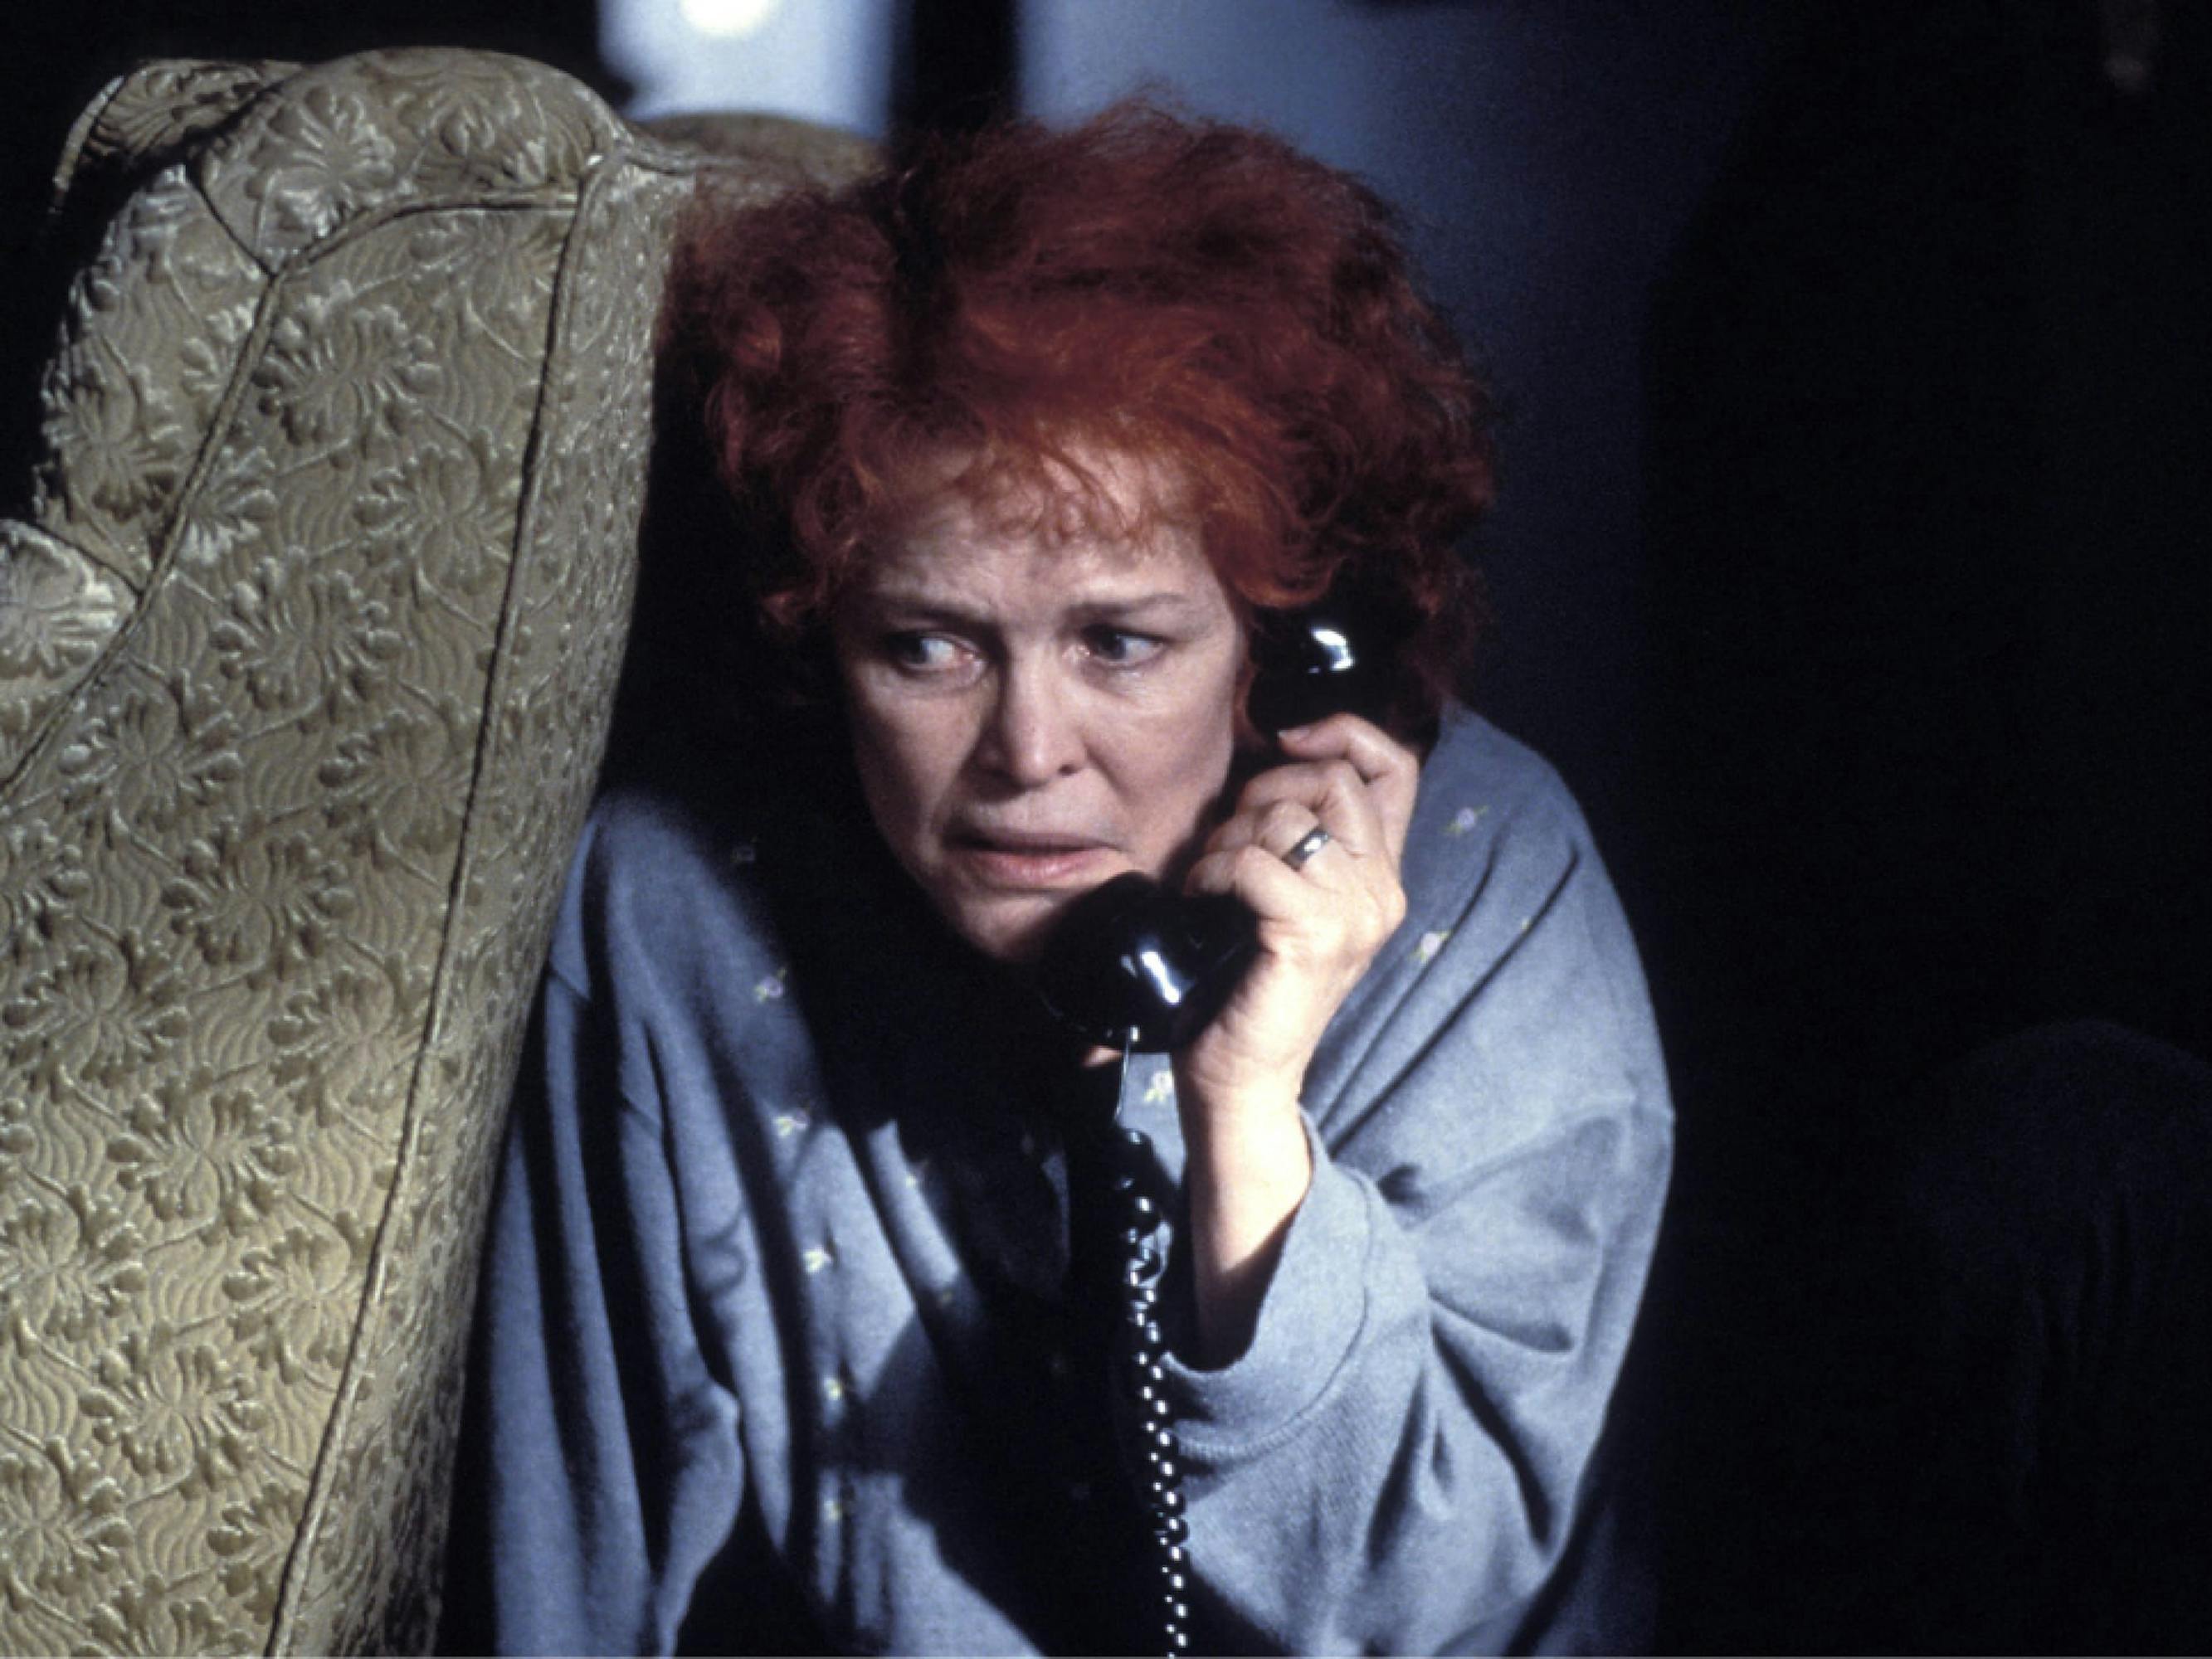 Ellen Burstyn as Sara Goldfarb in Requiem for a Dream. She’s crouched in fear behind upholstered furniture, gripping a phone to her ear, which is covered by an explosion of frizzy red hair.